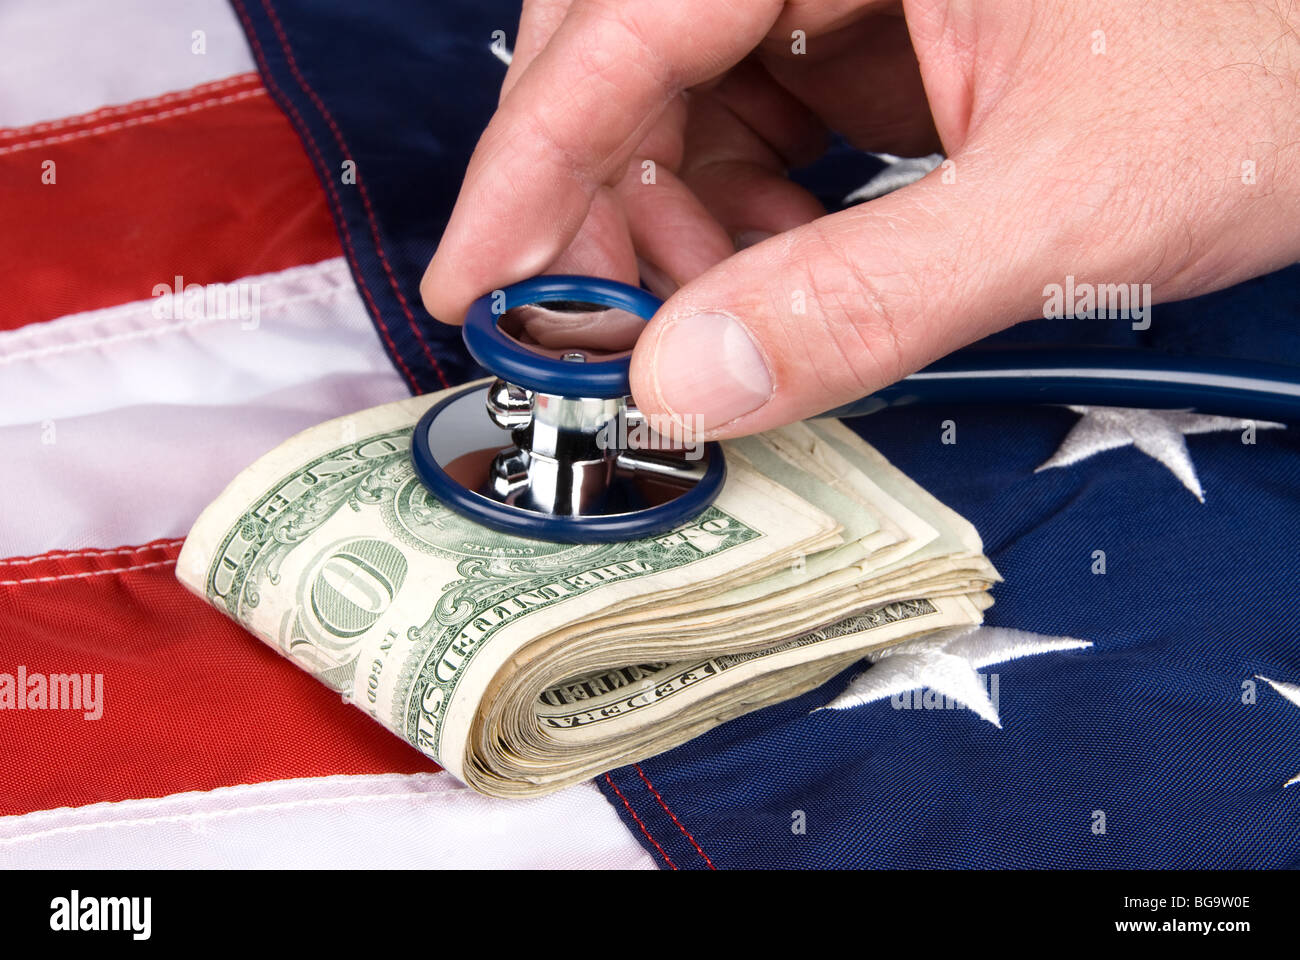 A pile of cash being examined with a stethoscope for signs of life. Image is good for medical or economic inferences. Stock Photo